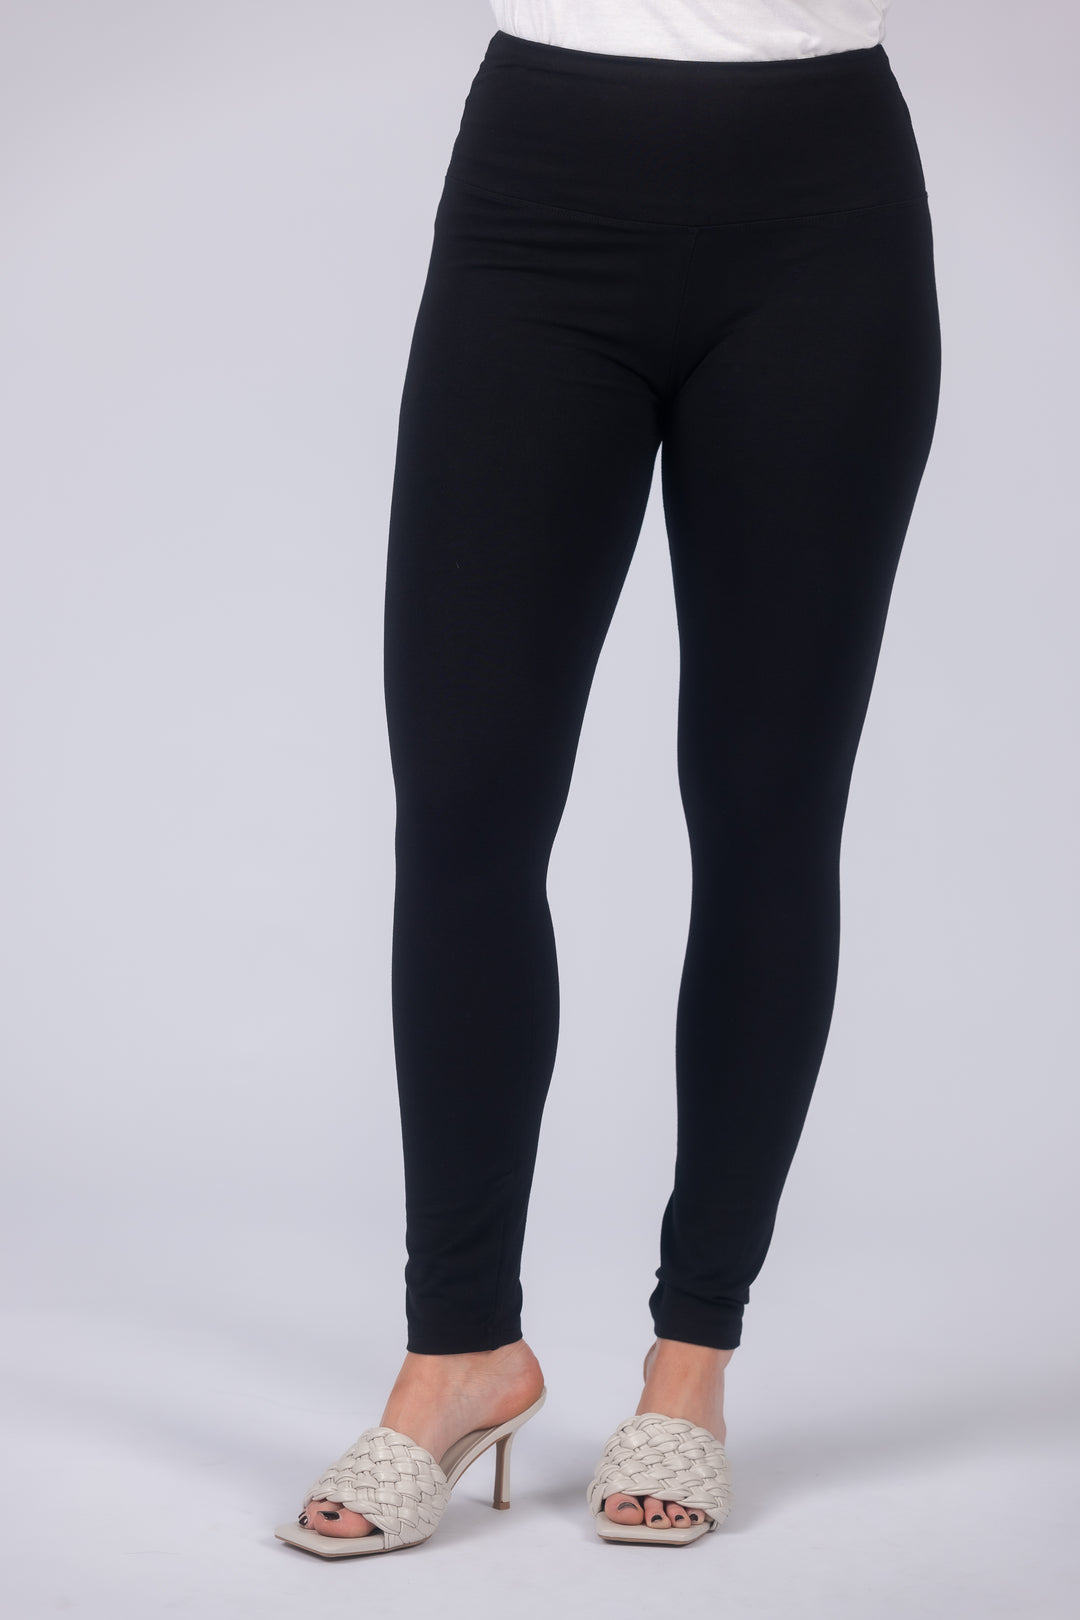 – Pull-On Intro Leggings the Fit Clothing Slimming Love Intro